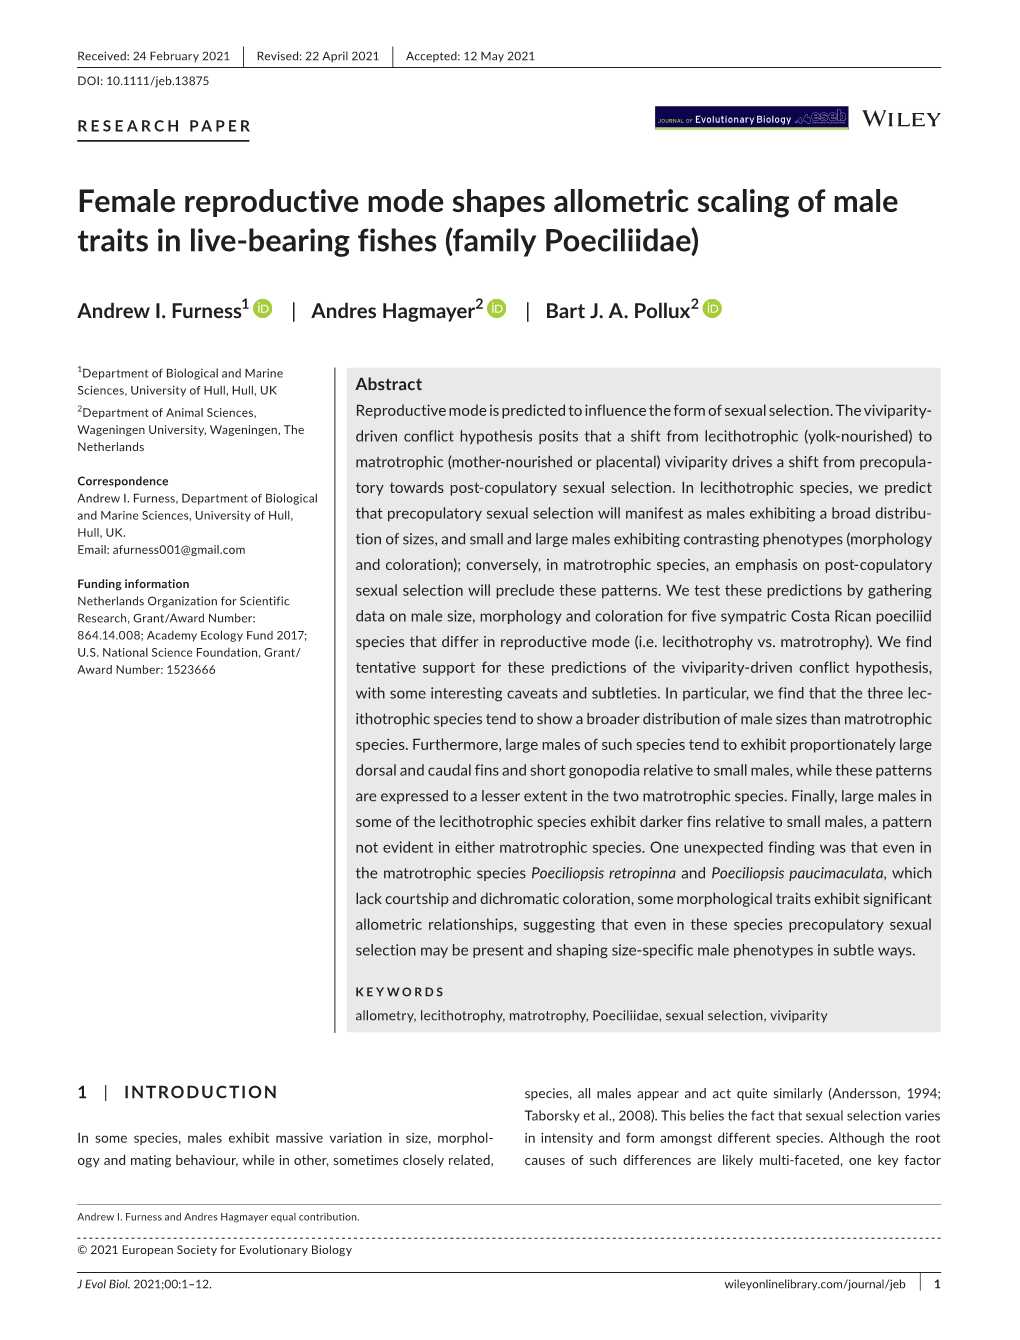 Female Reproductive Mode Shapes Allometric Scaling of Male Traits in Live-­Bearing Fishes (Family Poeciliidae)